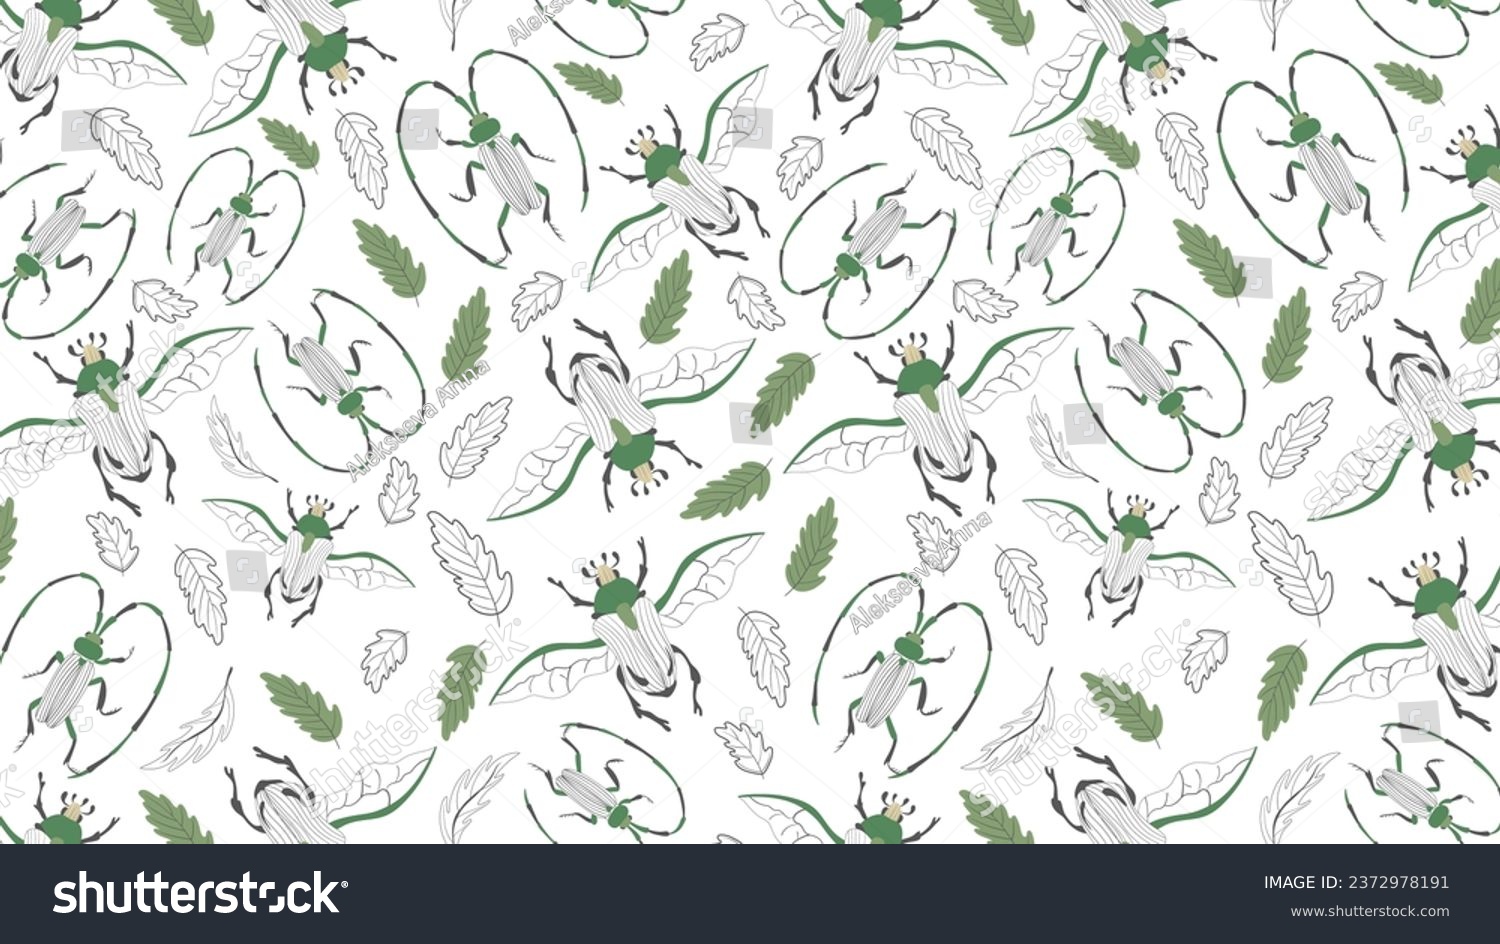 SVG of Seamless pattern with the image of beetles and leaves. Vector illustration svg